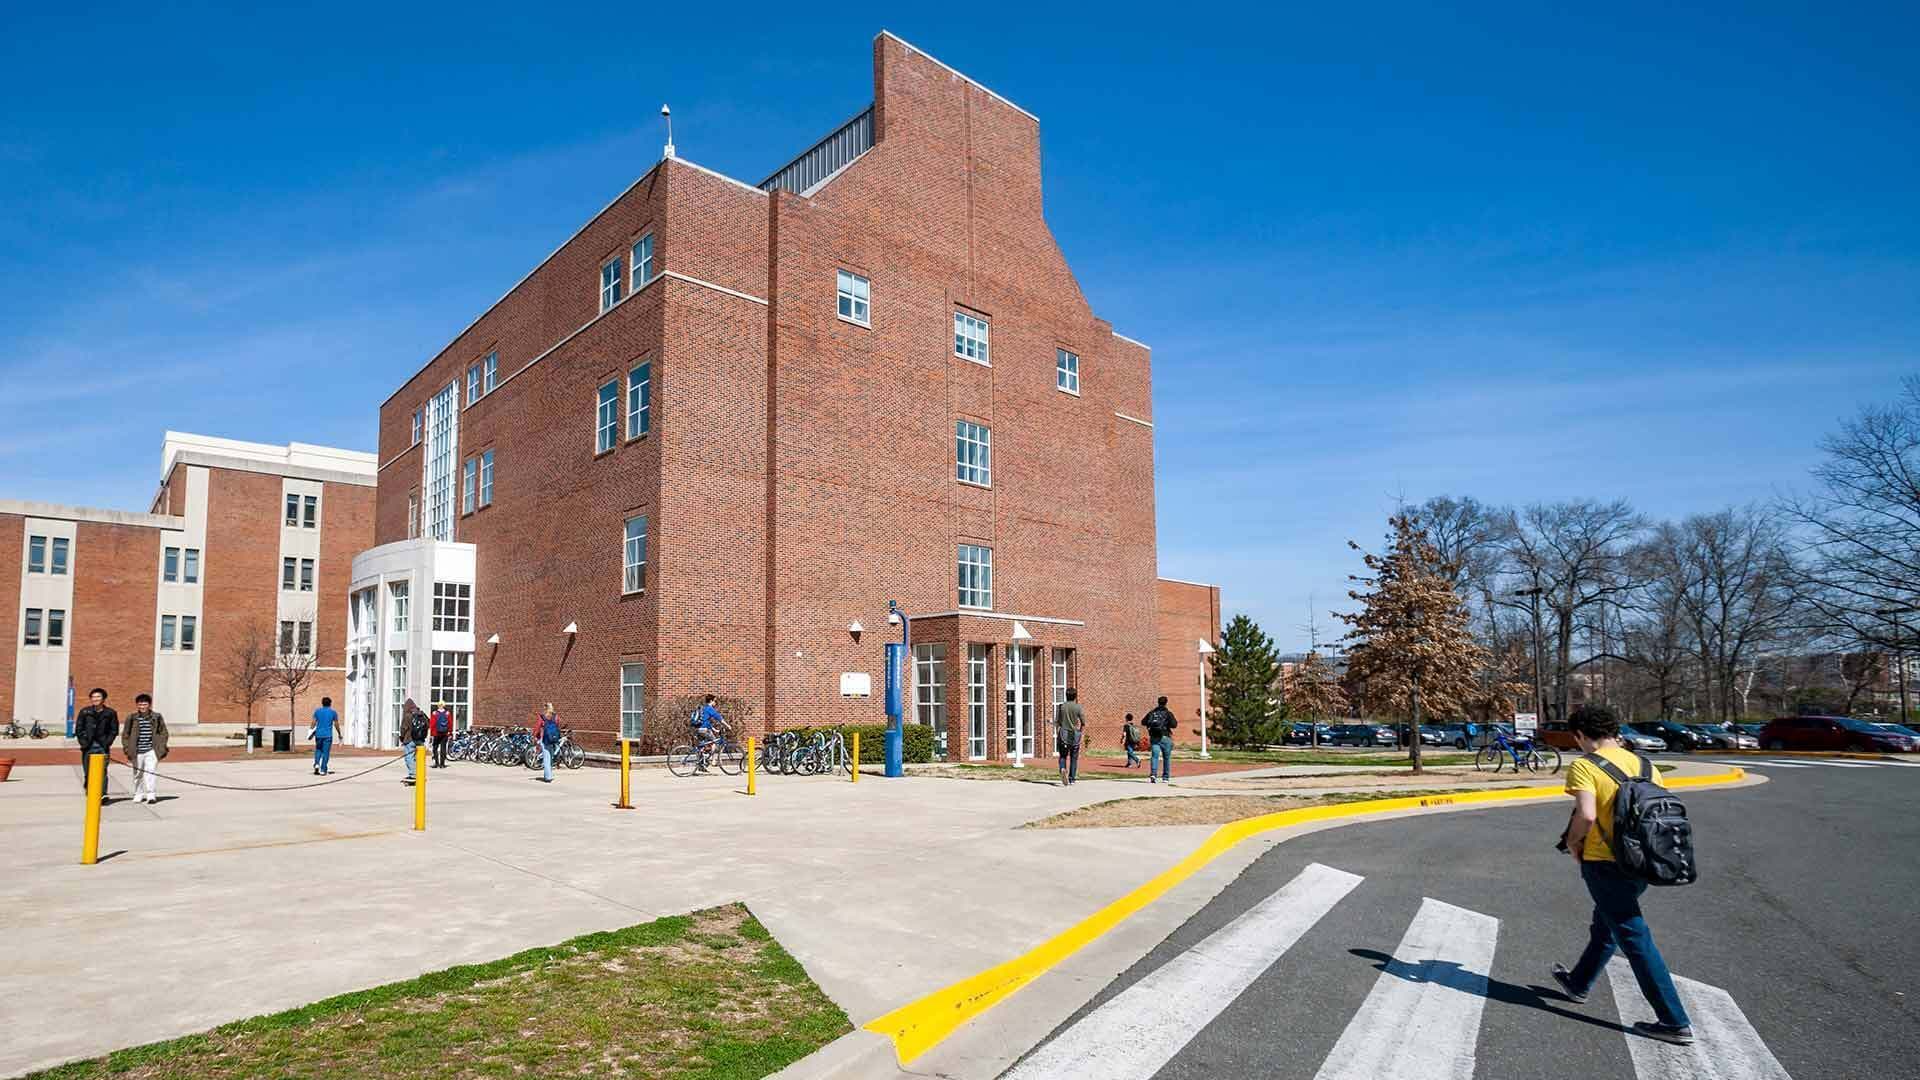 Computer Science Instructional Center, a large brick building with bright white accents